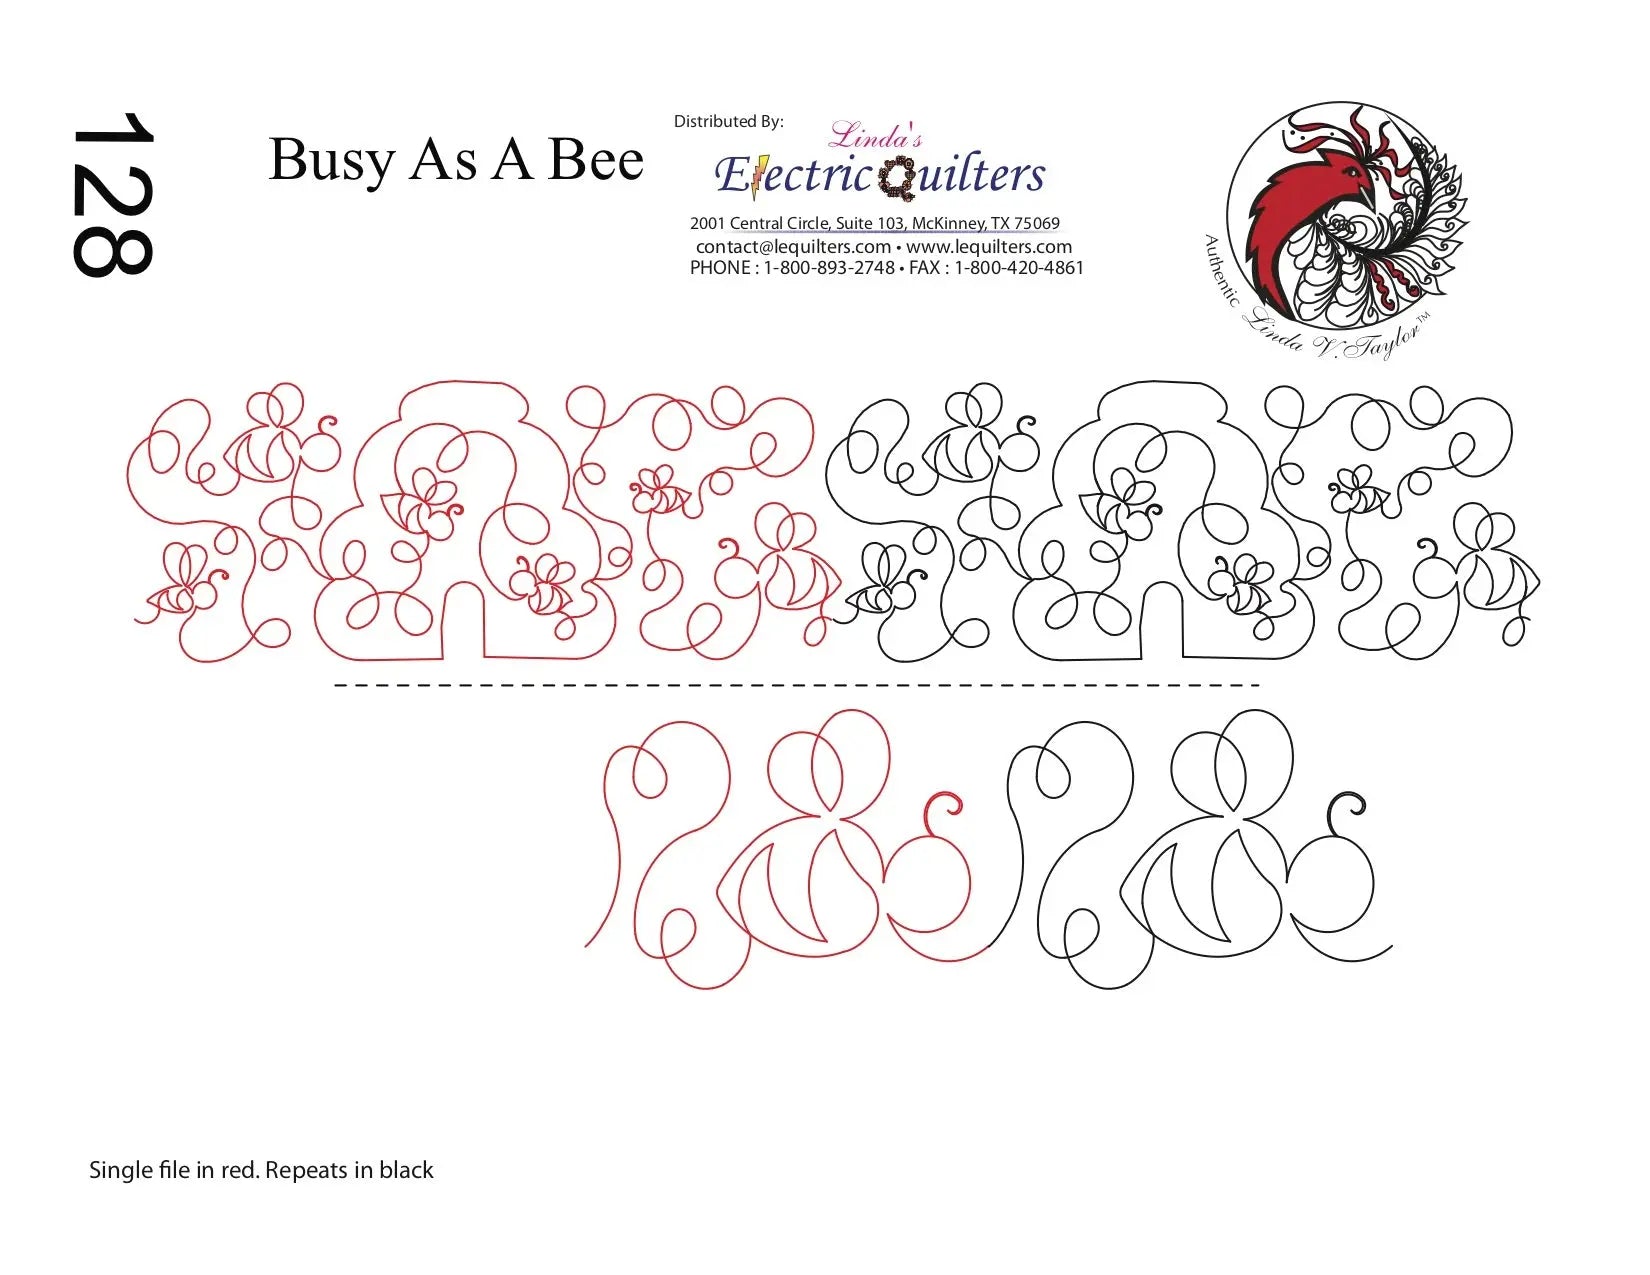 128 Busy As A Bee Pantograph by Linda V. Taylor - Linda's Electric Quilters